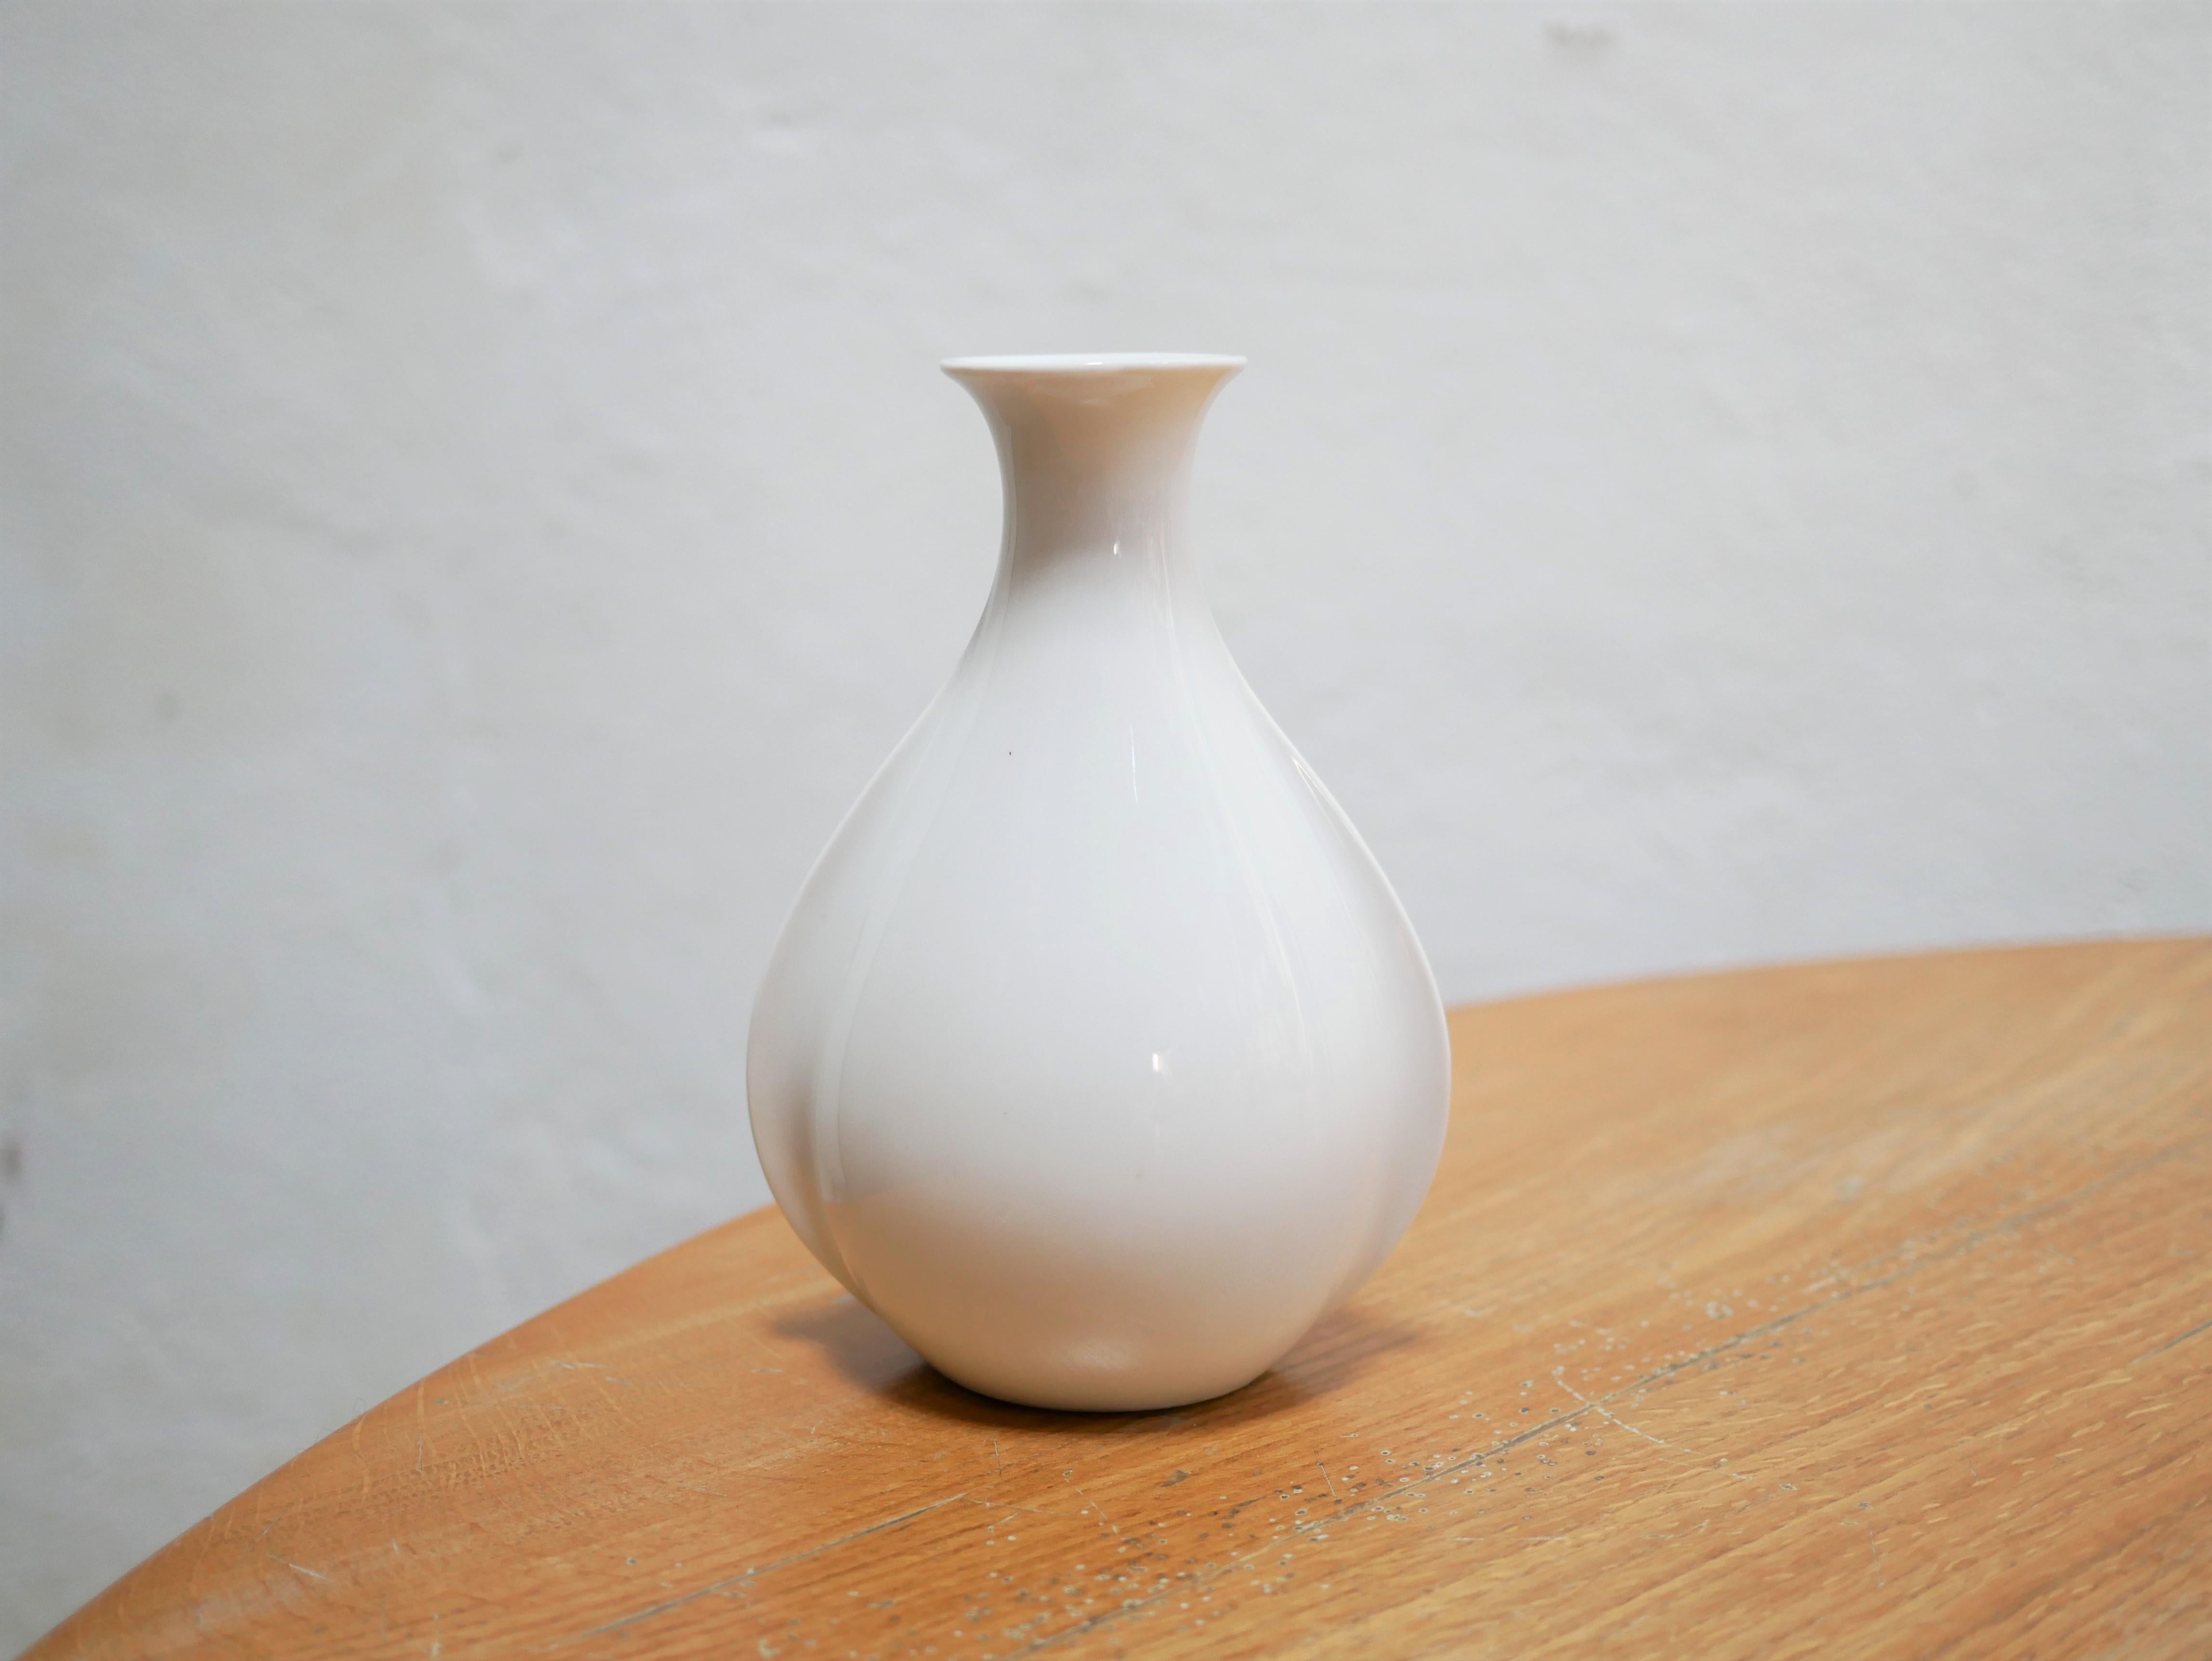 Porcelain vase designed by the German manufacturer Seltmann Weiden in the 1960s.

With its modern shape and the purity of its hue, this vase will be perfect in a natural, refined and delicate decoration.
We simply imagine it placed on a shelf or